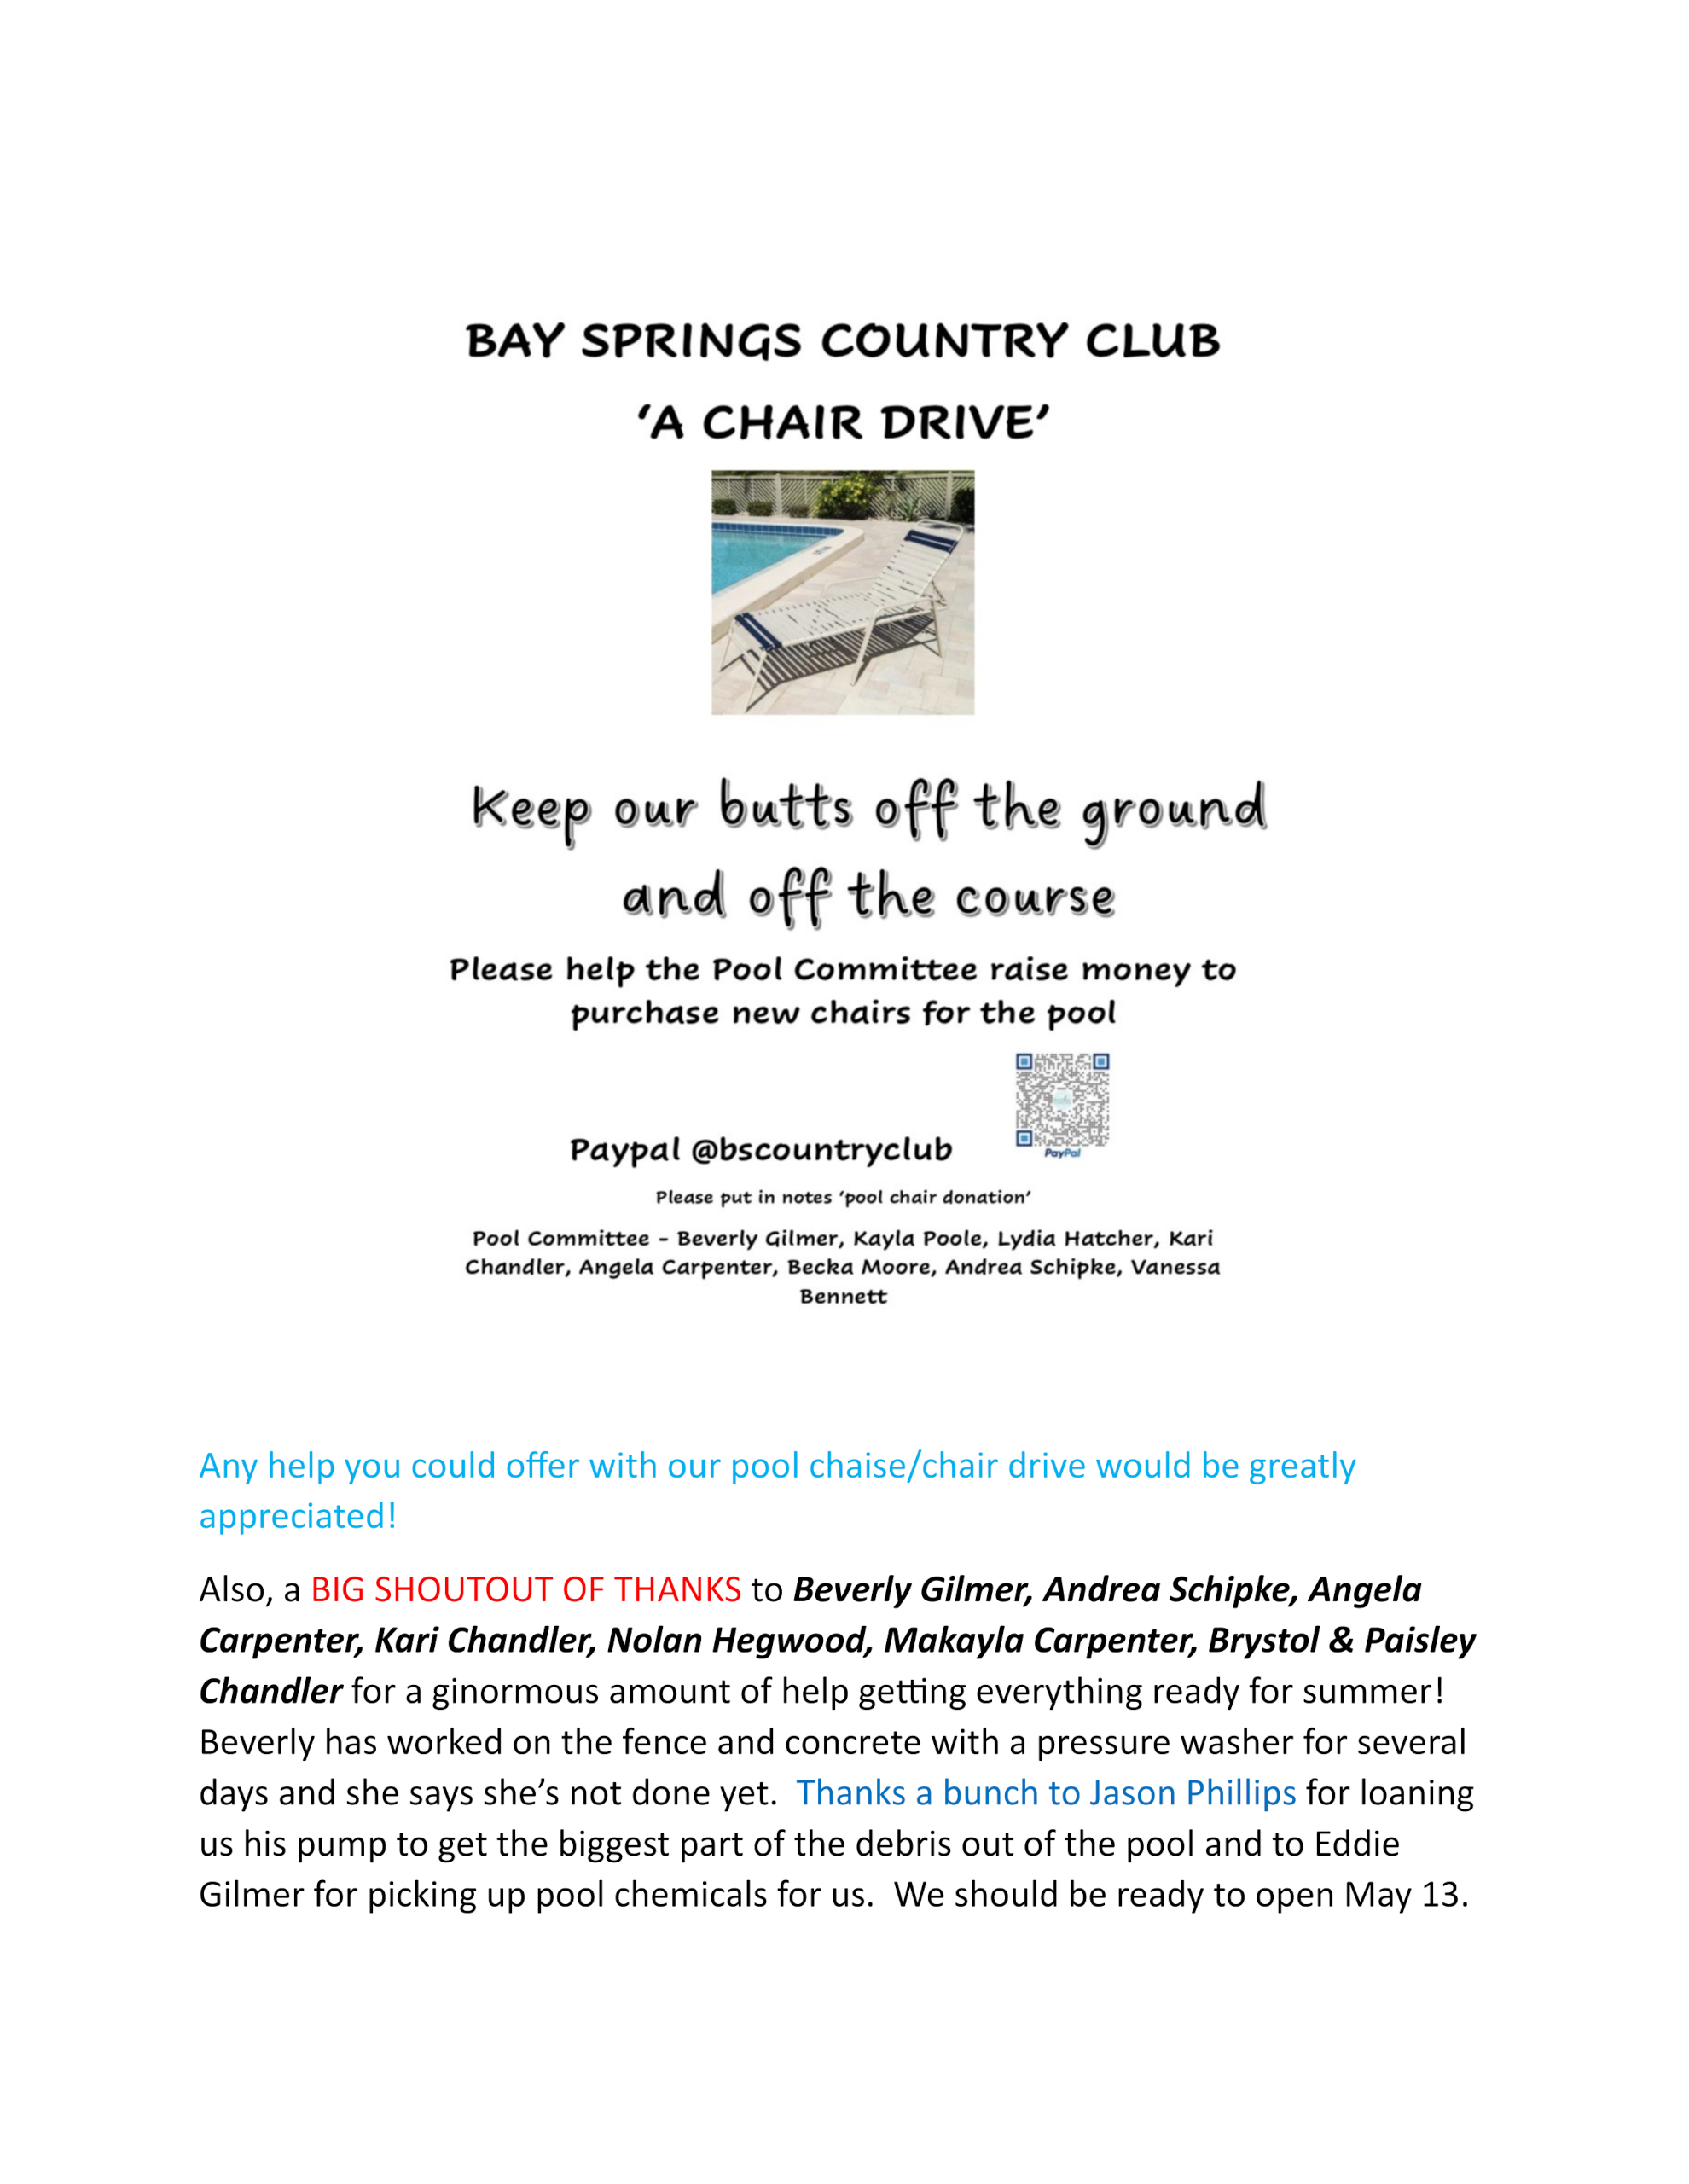 Bay Springs Country Club | Home (EngageBox) - (2023) Bay Springs Country Club Home (EngageBox) – (2023) Bay Springs Country Club 'A Chair Drive' Popup / Promo (Image #1)